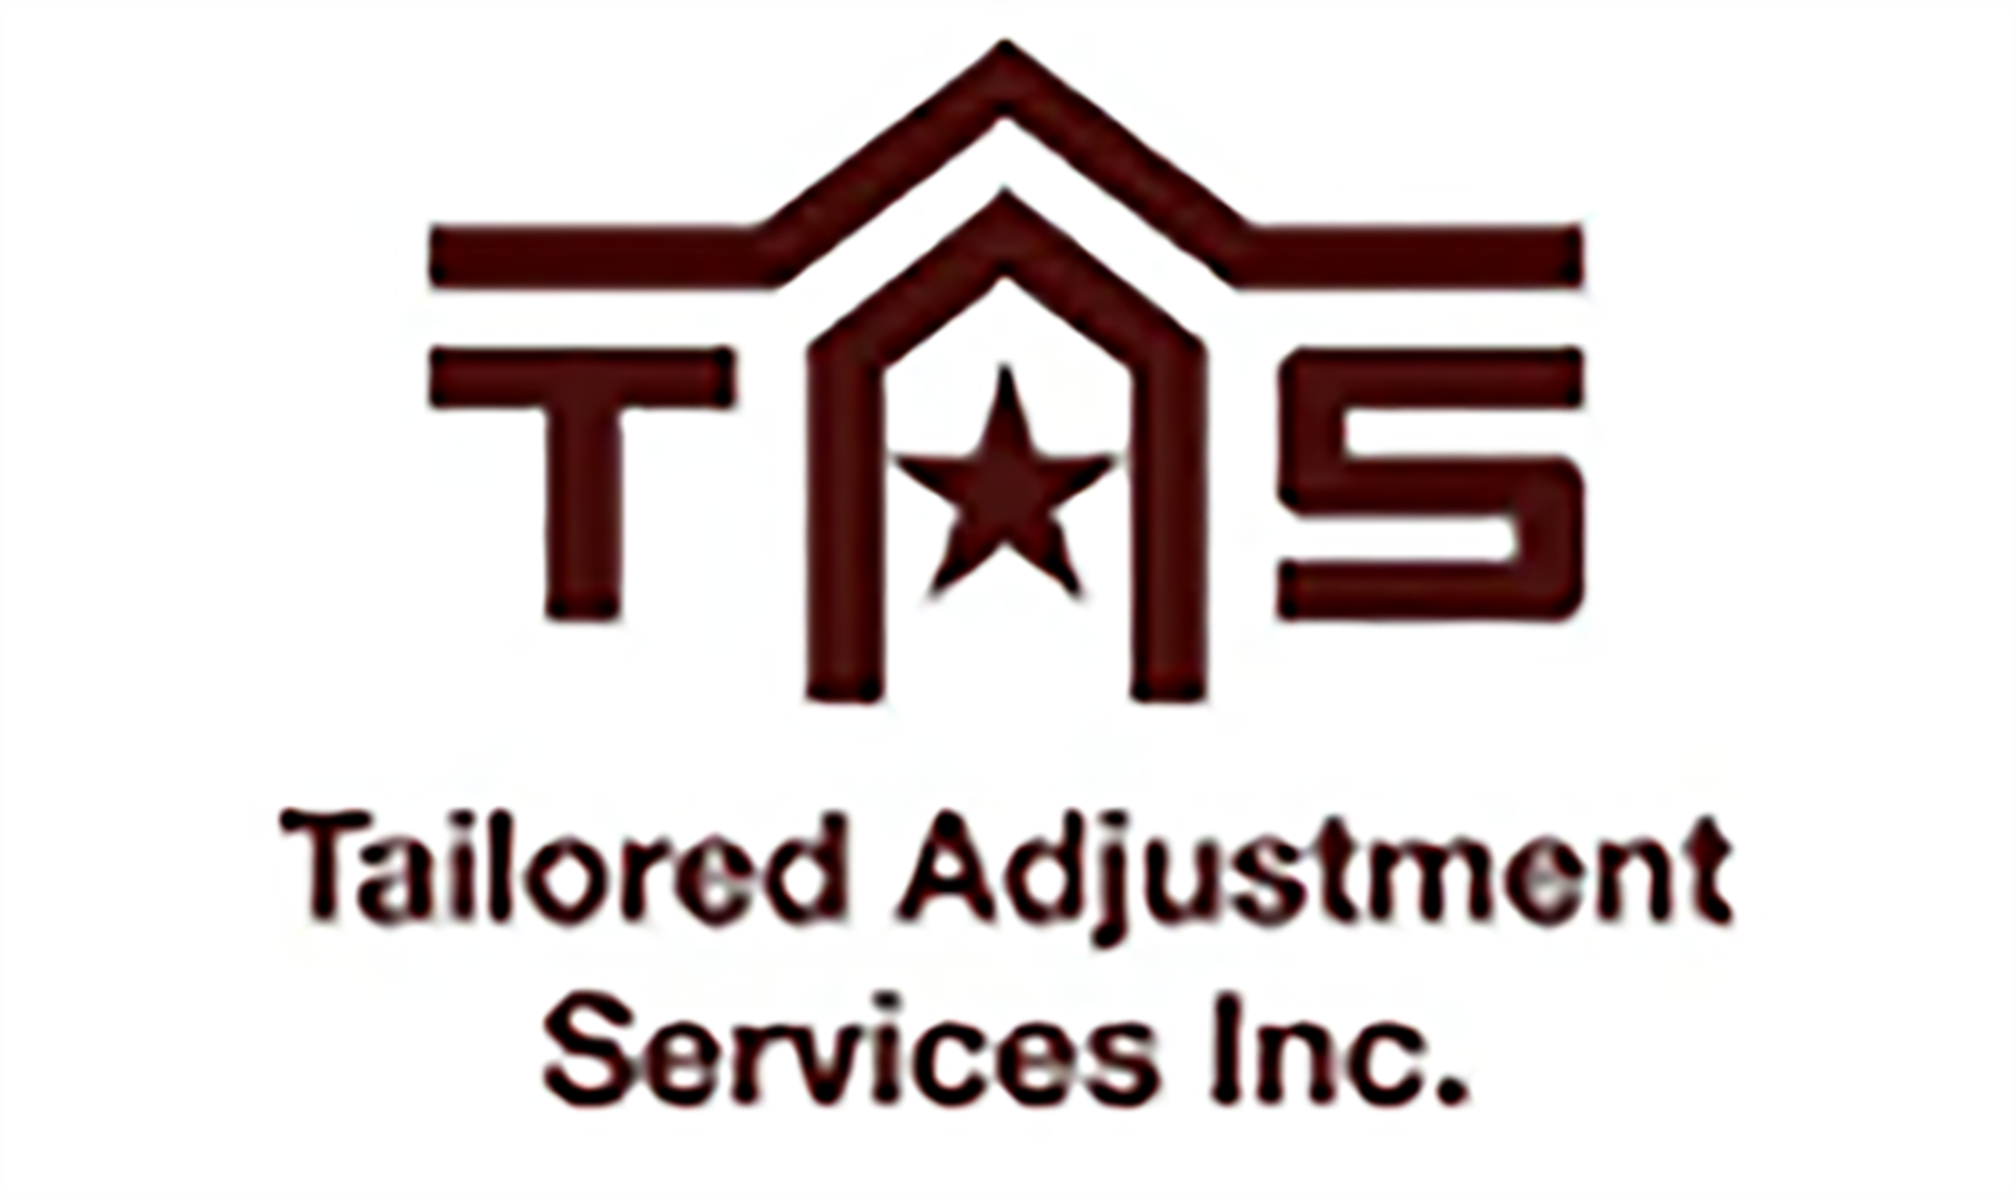 Global Risk Solutions / Tailored Adjustment Services